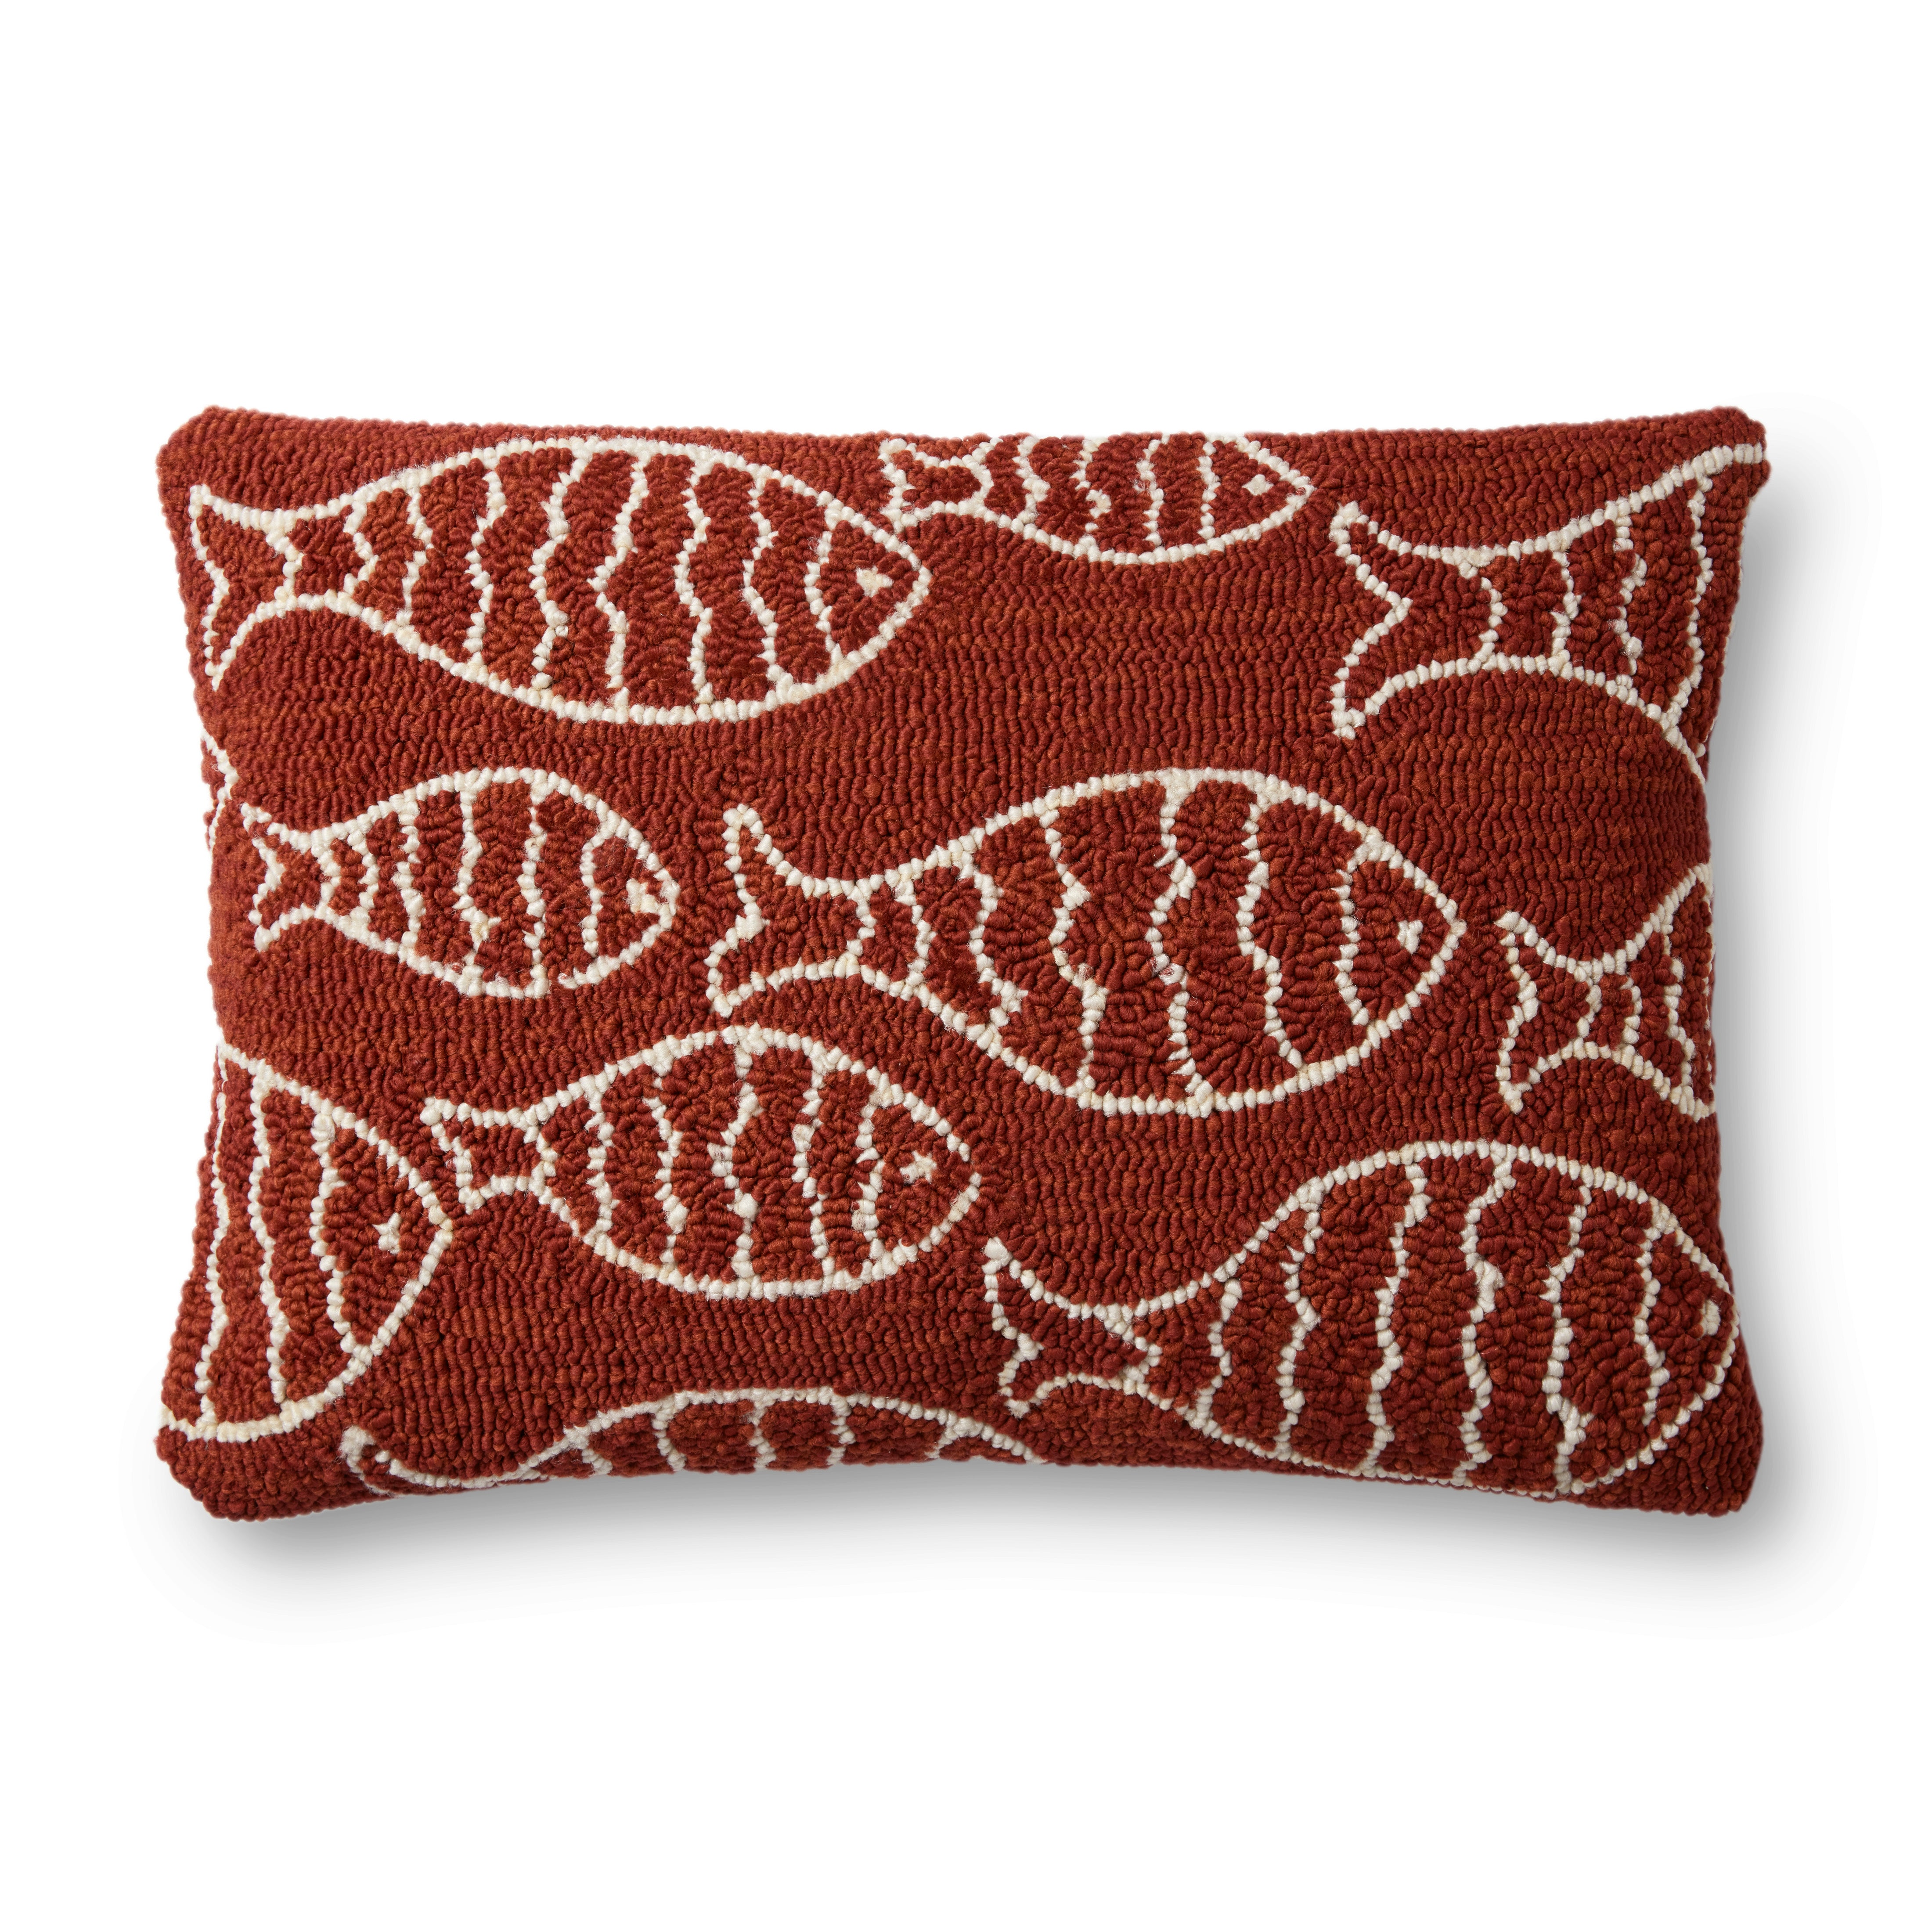 In/Out Hand Hooked Fish Pattern Decorative Lumbar Pillow